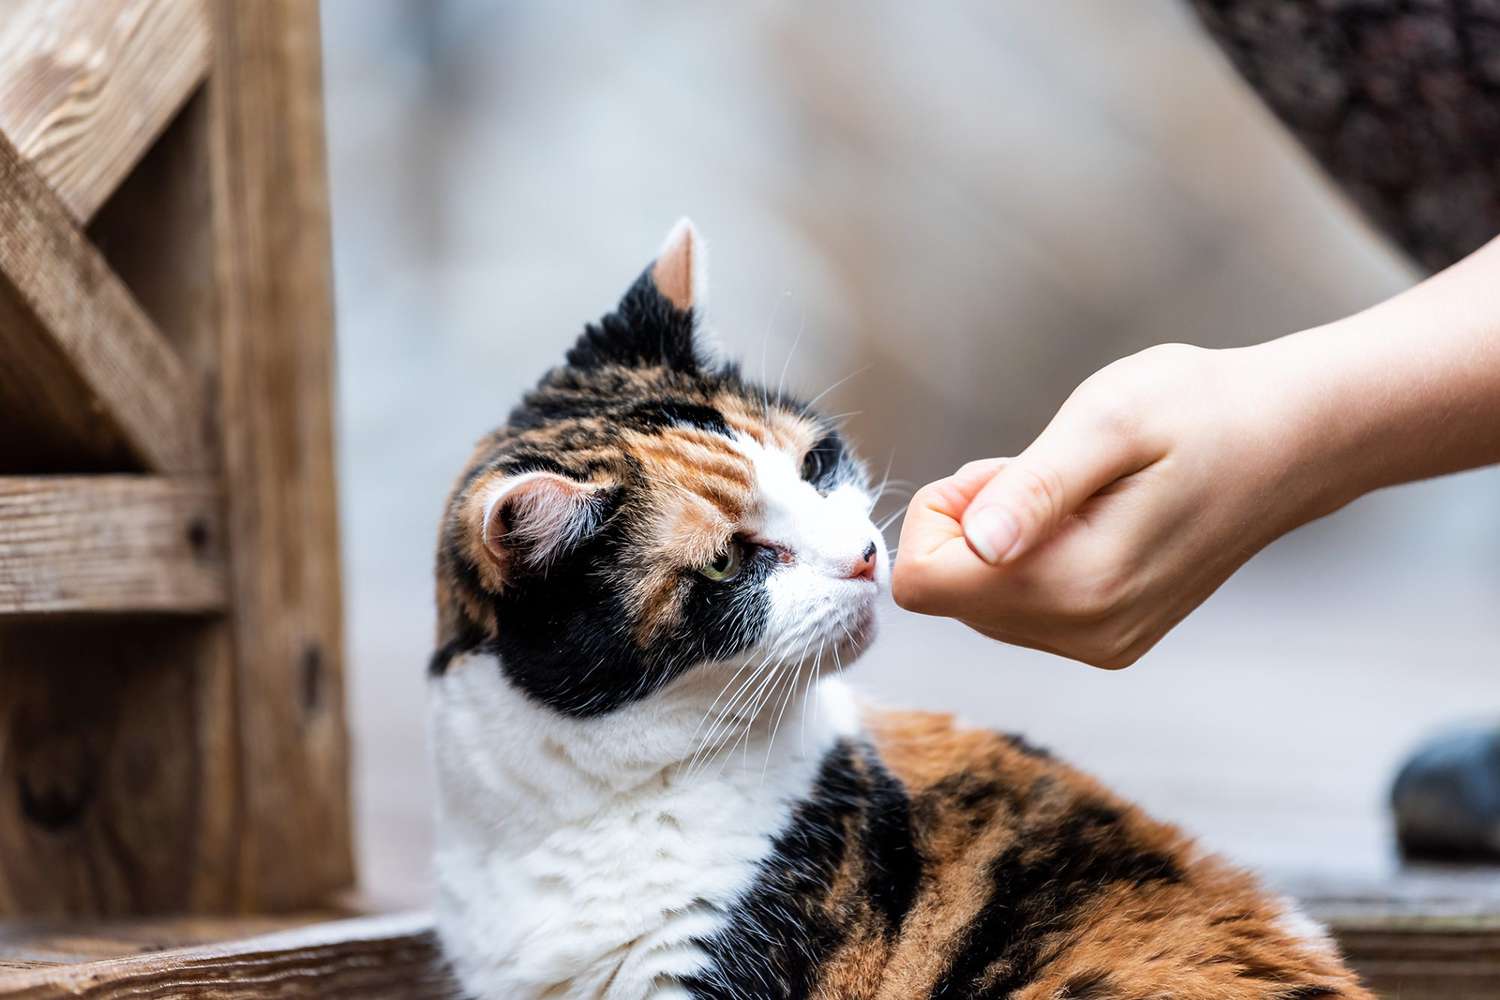 cat sniffing what is in person's fist for "find it" command